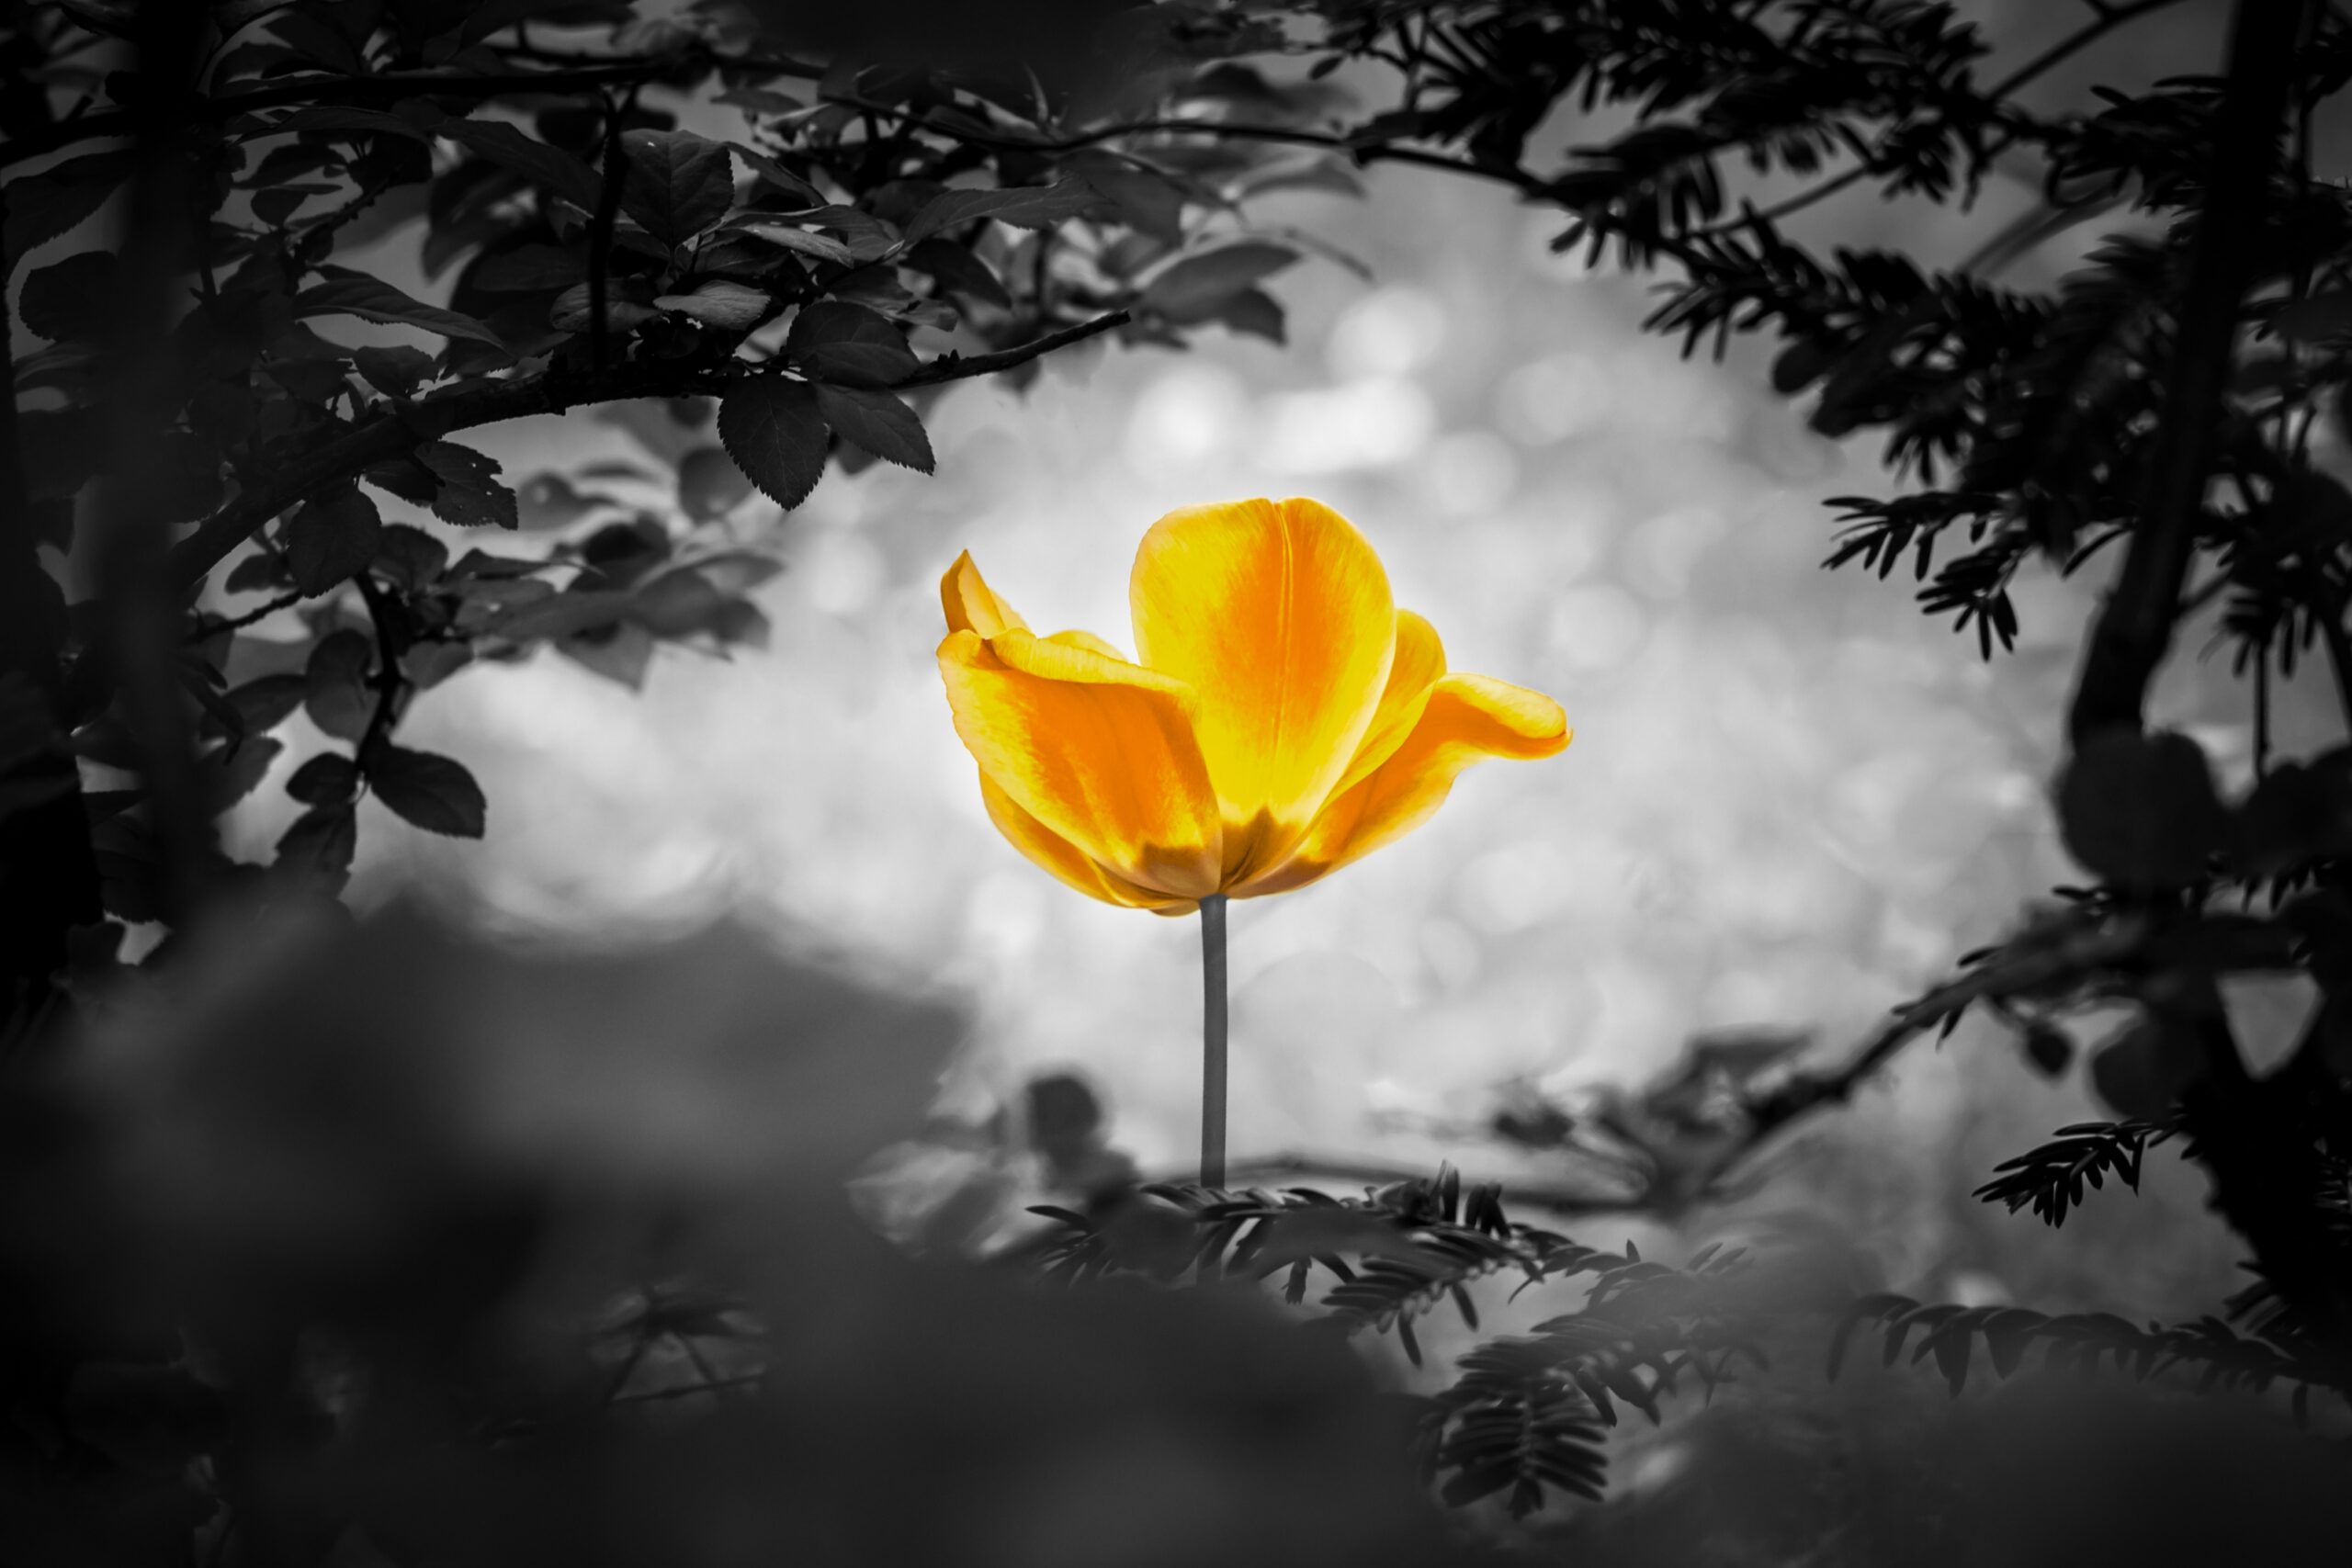 Yellow tulip soul in black white for peace heal hope. The flower